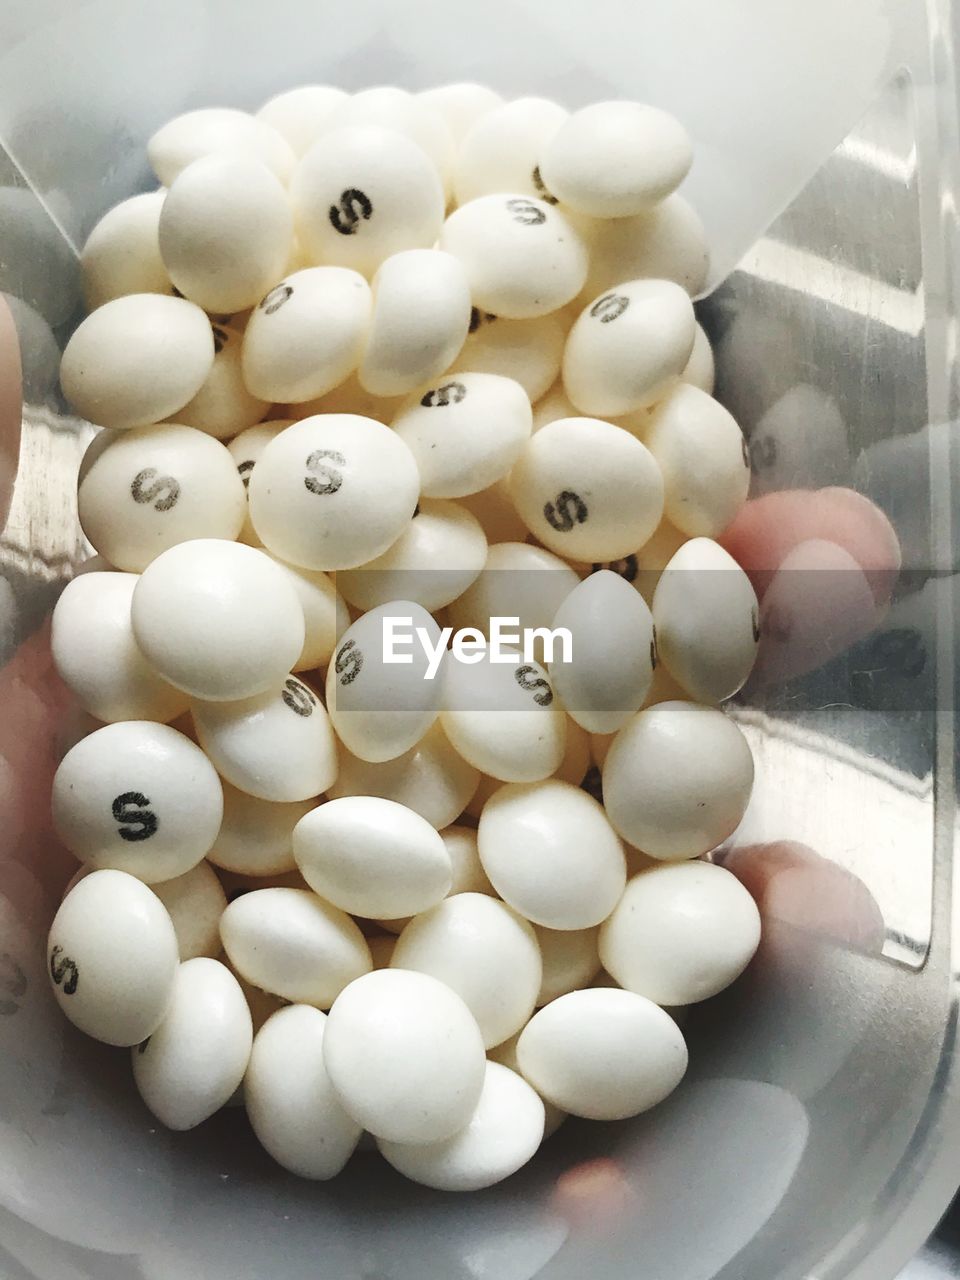 HIGH ANGLE VIEW OF EGGS ON WHITE CONTAINER